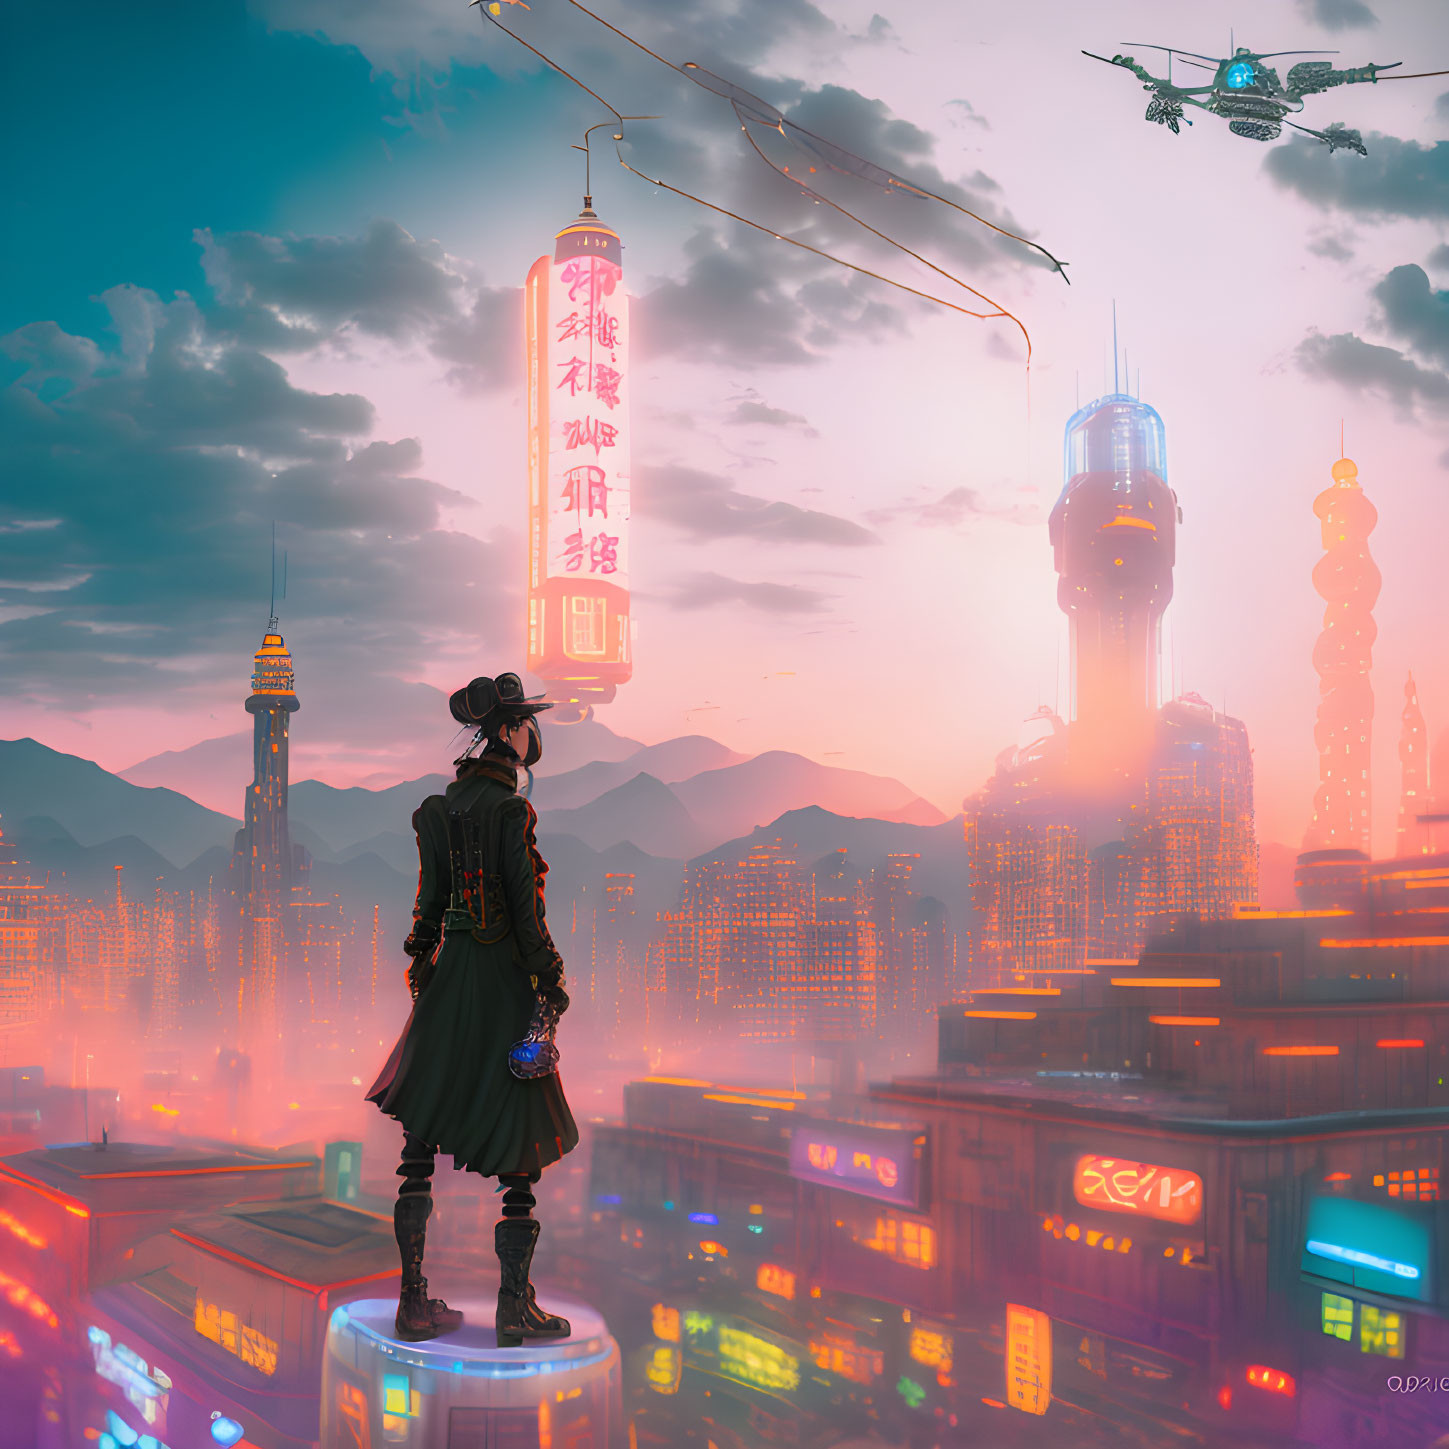 Cyberpunk cityscape: towering skyscrapers, neon signs, figure in long coat, drone